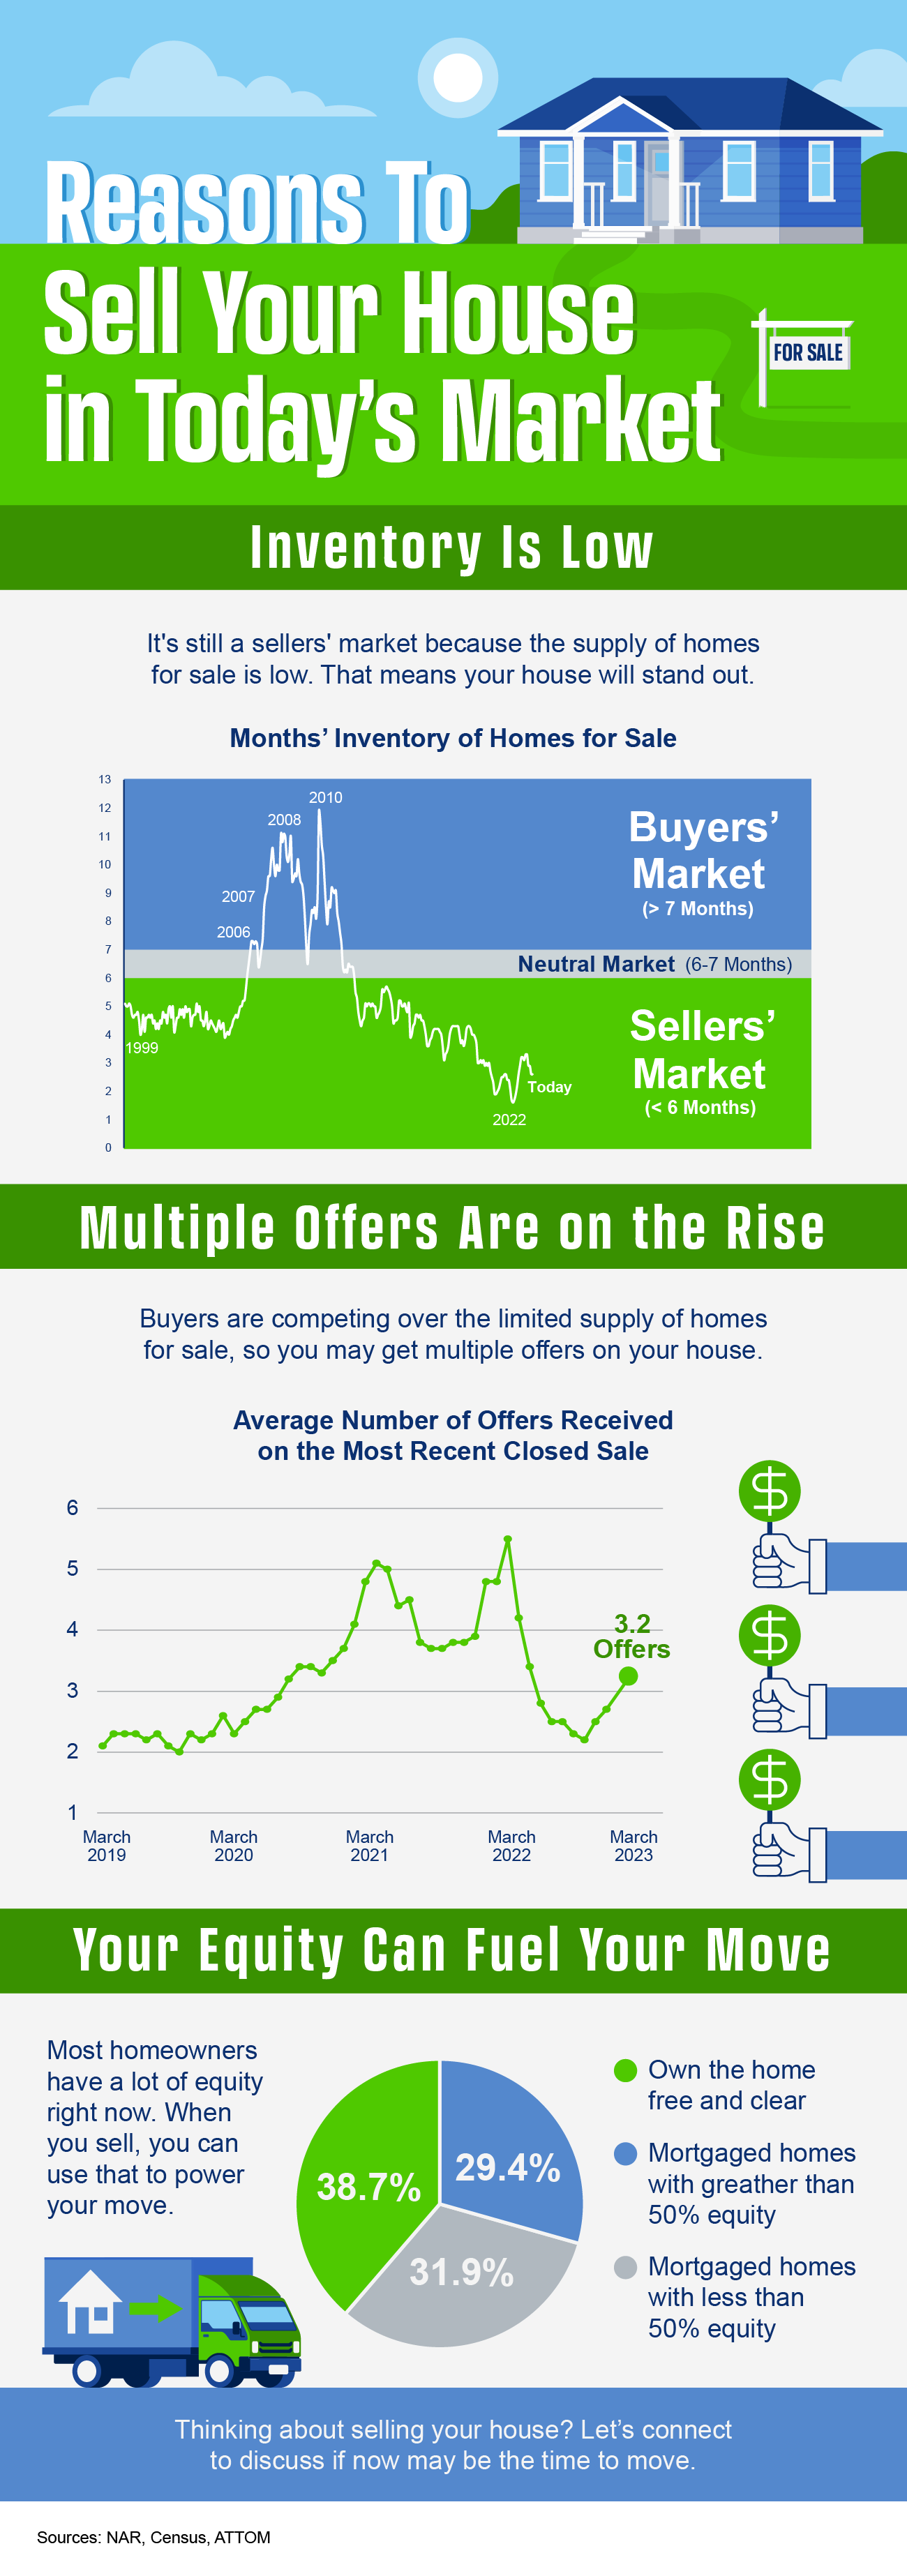 Reasons To Sell Your House Today's Market - Chicago Real Estate